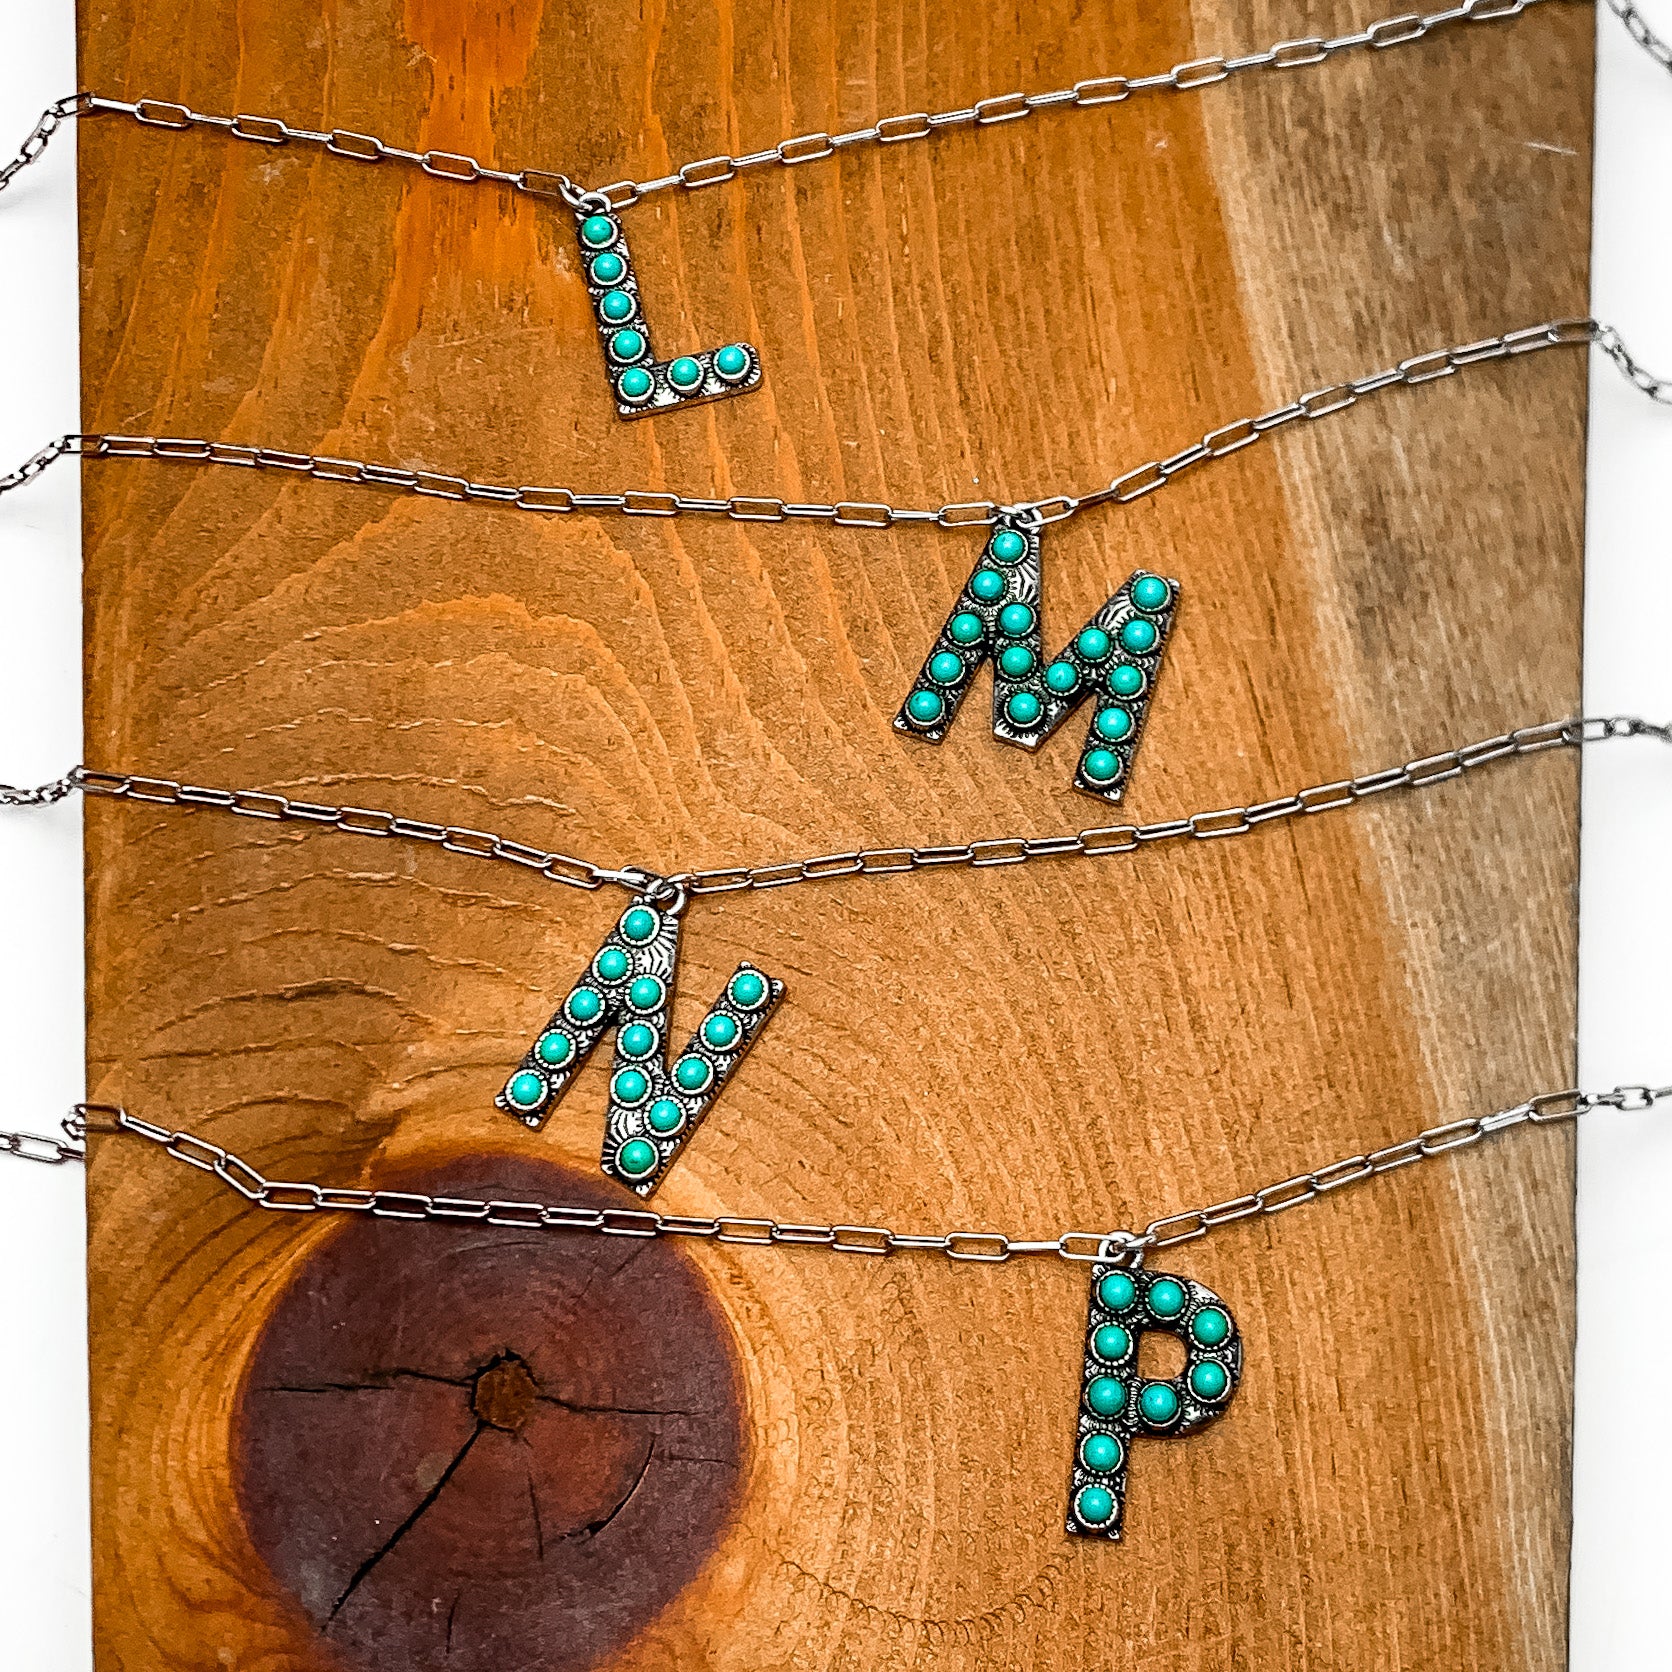 Wear It Proud Initial Necklaces in Turquoise - Giddy Up Glamour Boutique